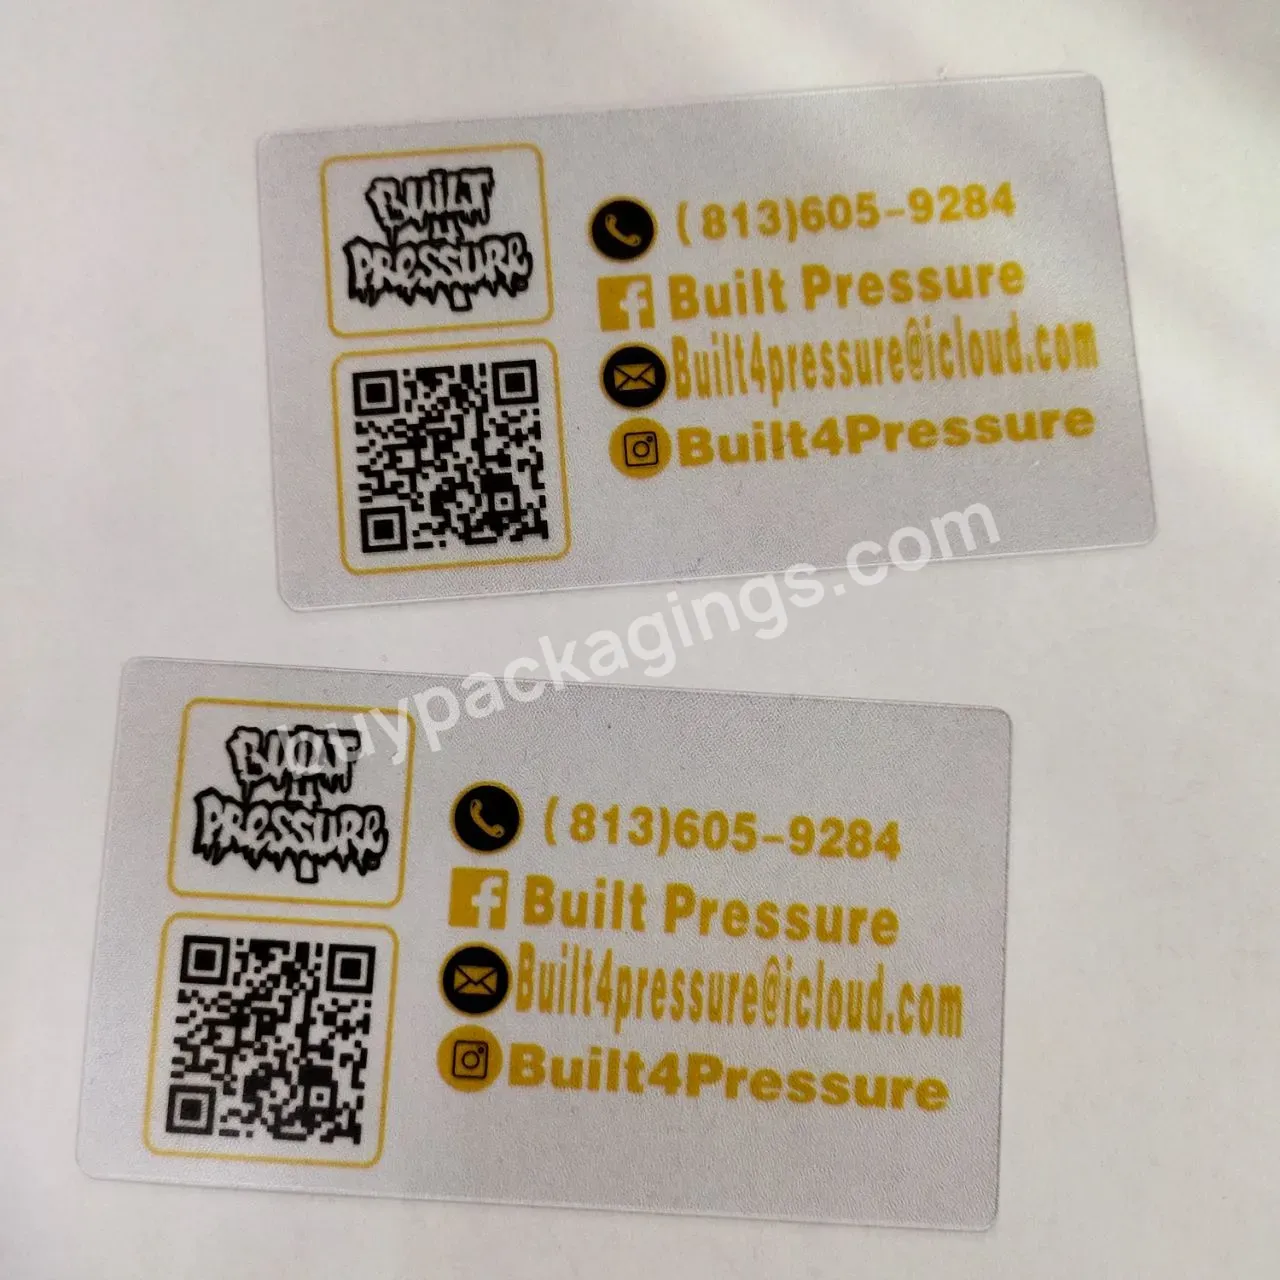 New Design Custom Plastic Pvc Card Printing Business Card With Social Media Transparent Coupon Card For Promotion